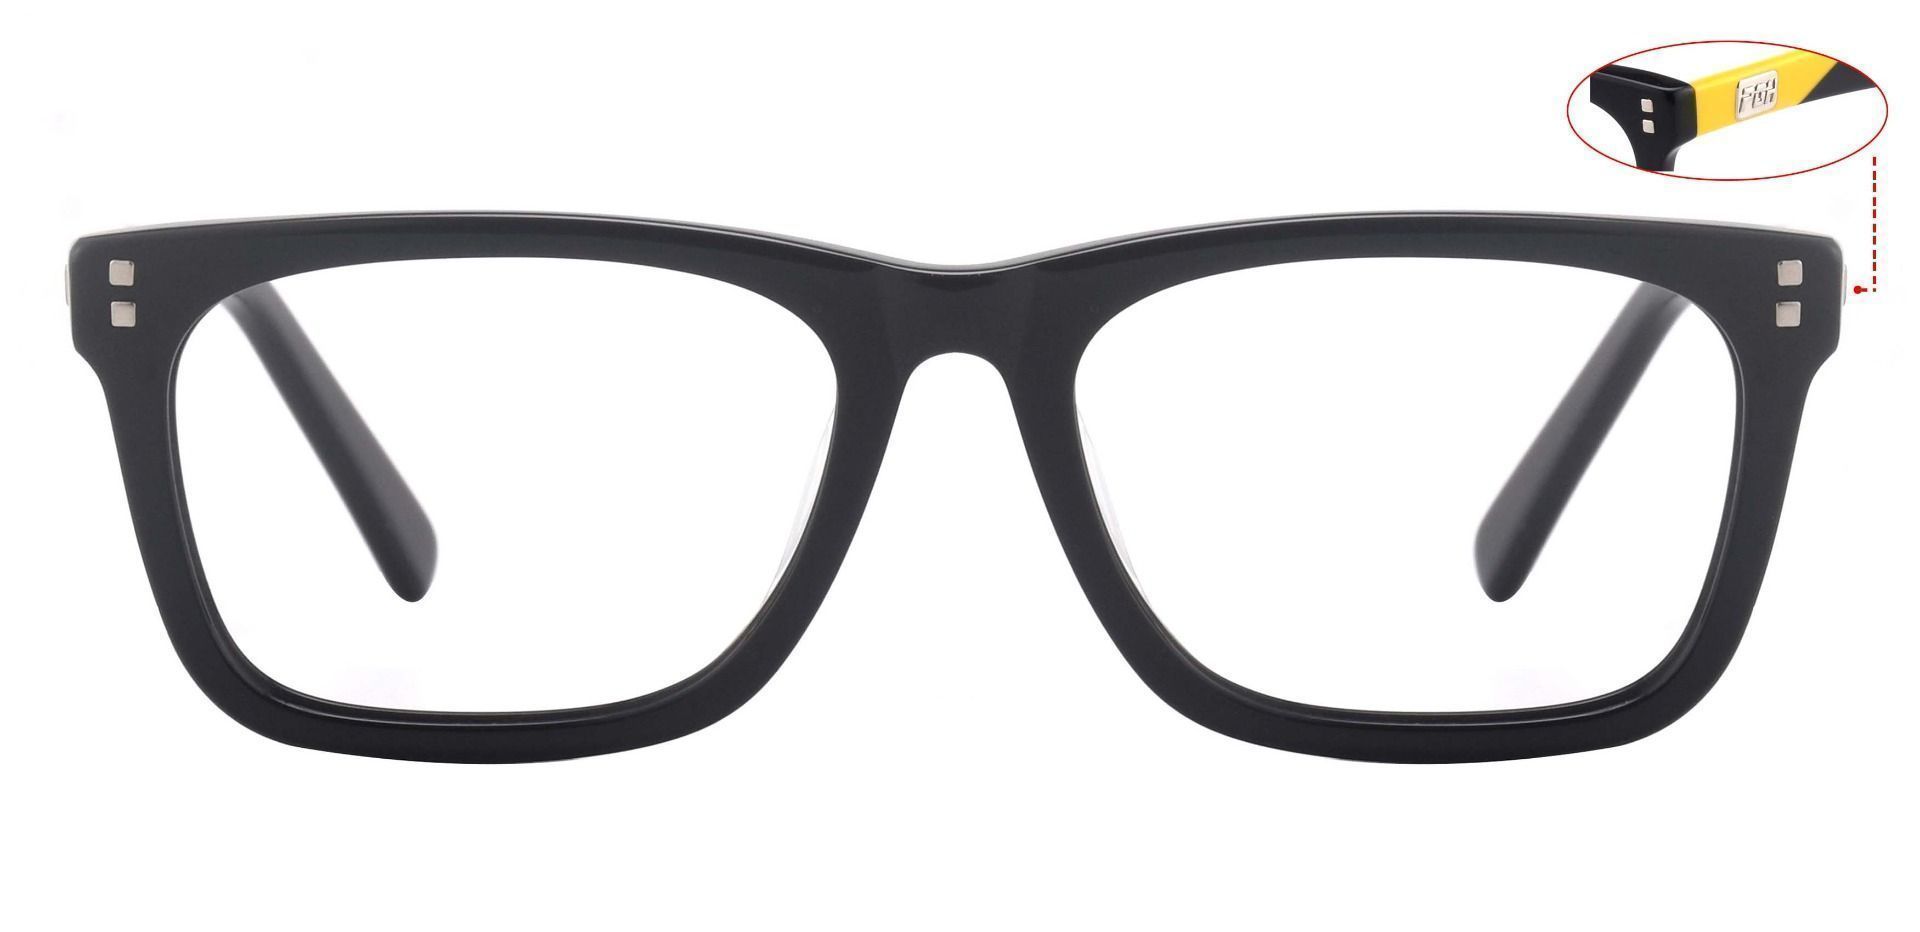 Blitz Rectangle Non-Rx Glasses - The Frame Is Black And Yellow